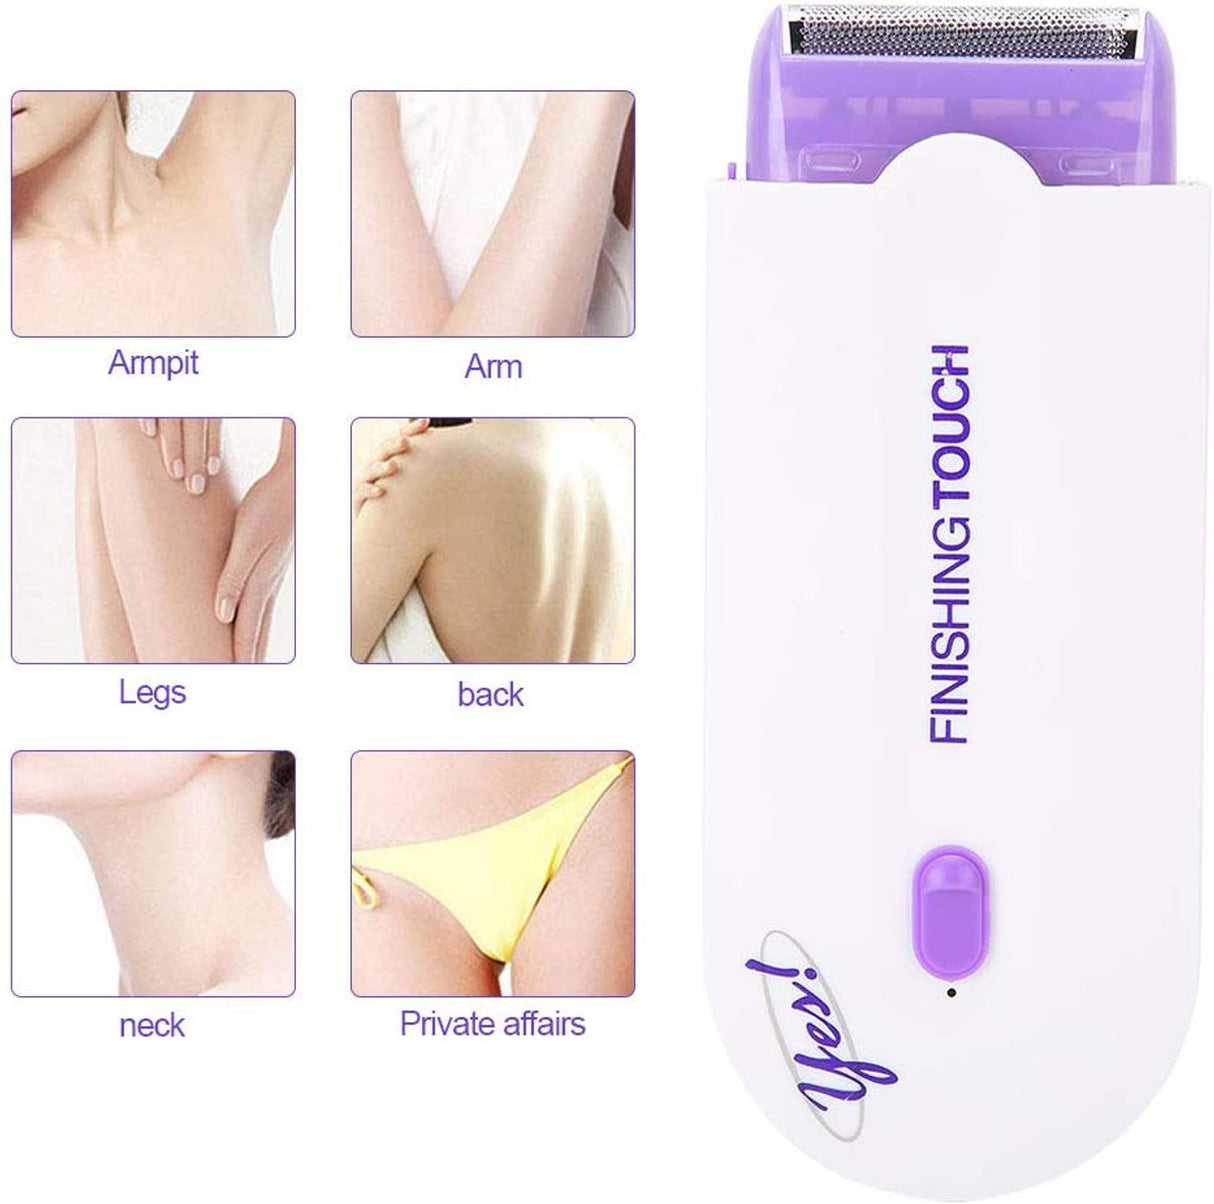 Electric Shaver for Women, Facial Hair Remover, Hair Removal Machine